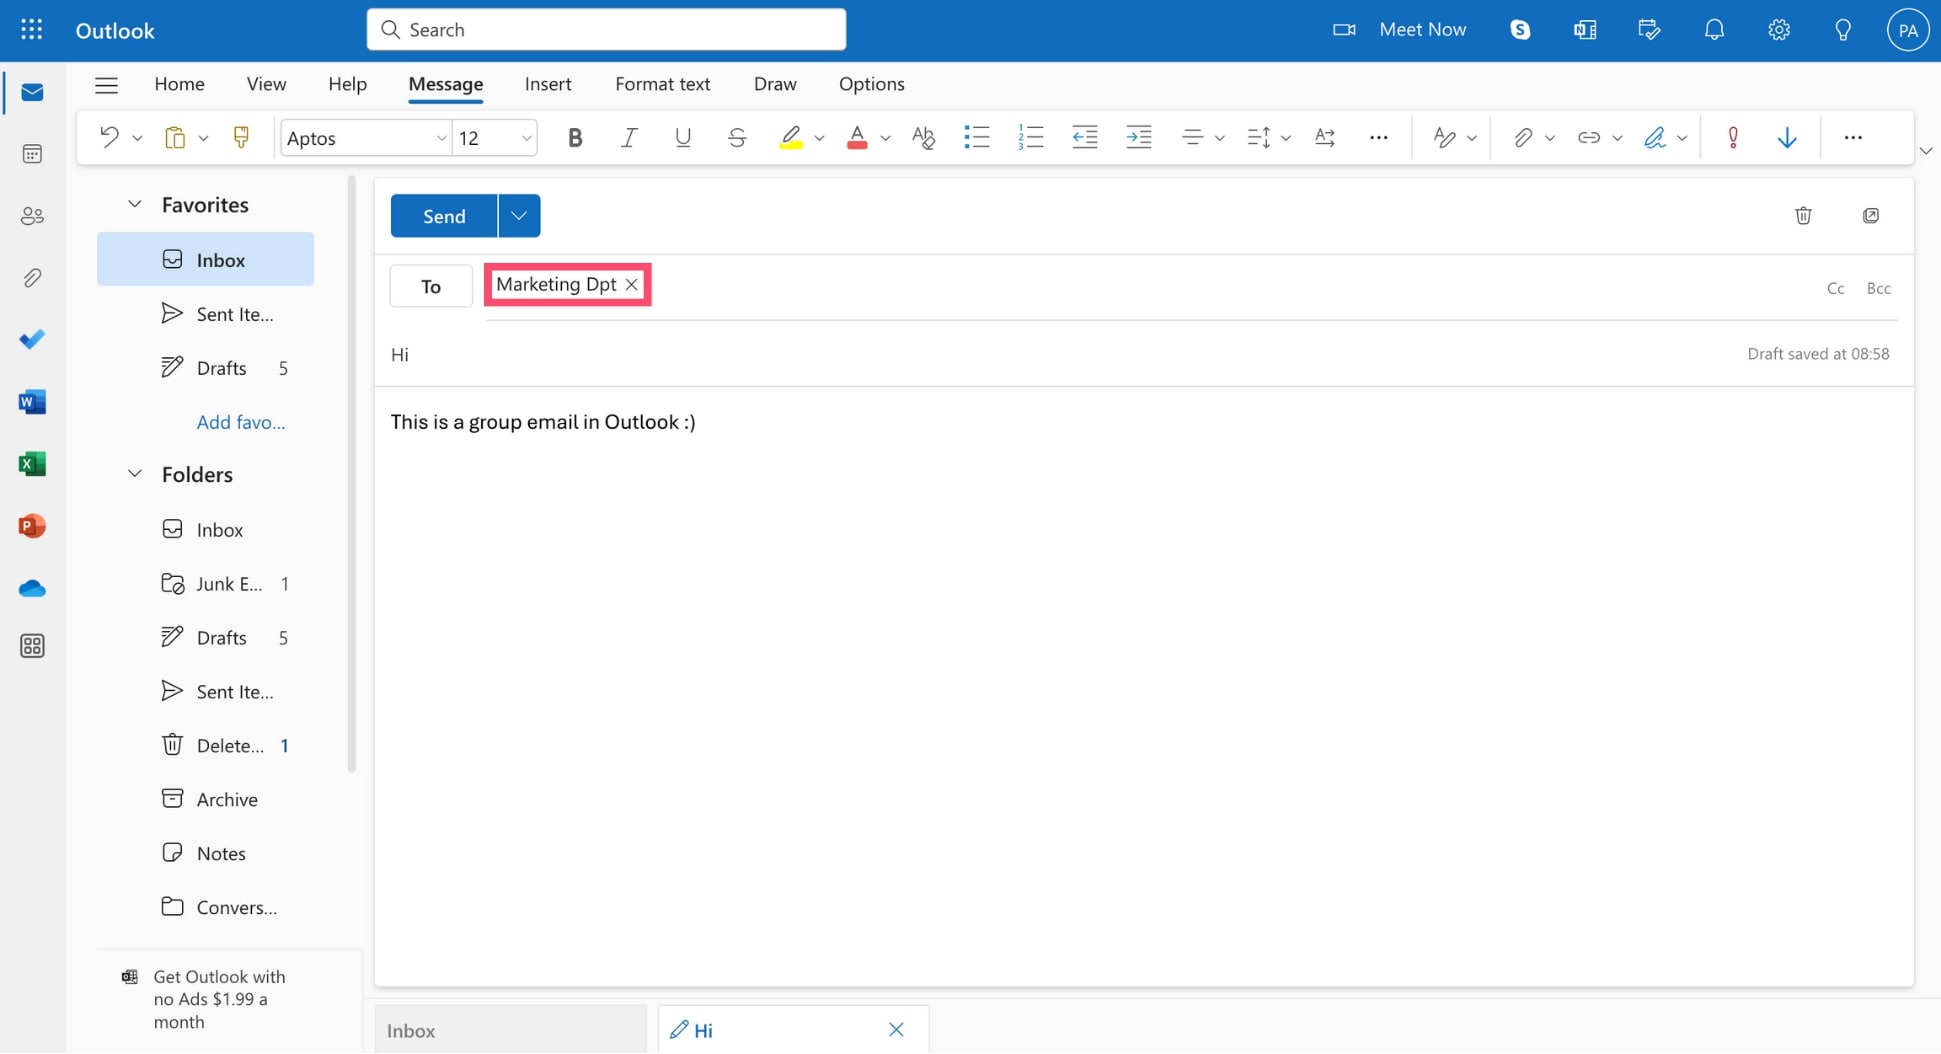 Add the email address of your Outlook contact group